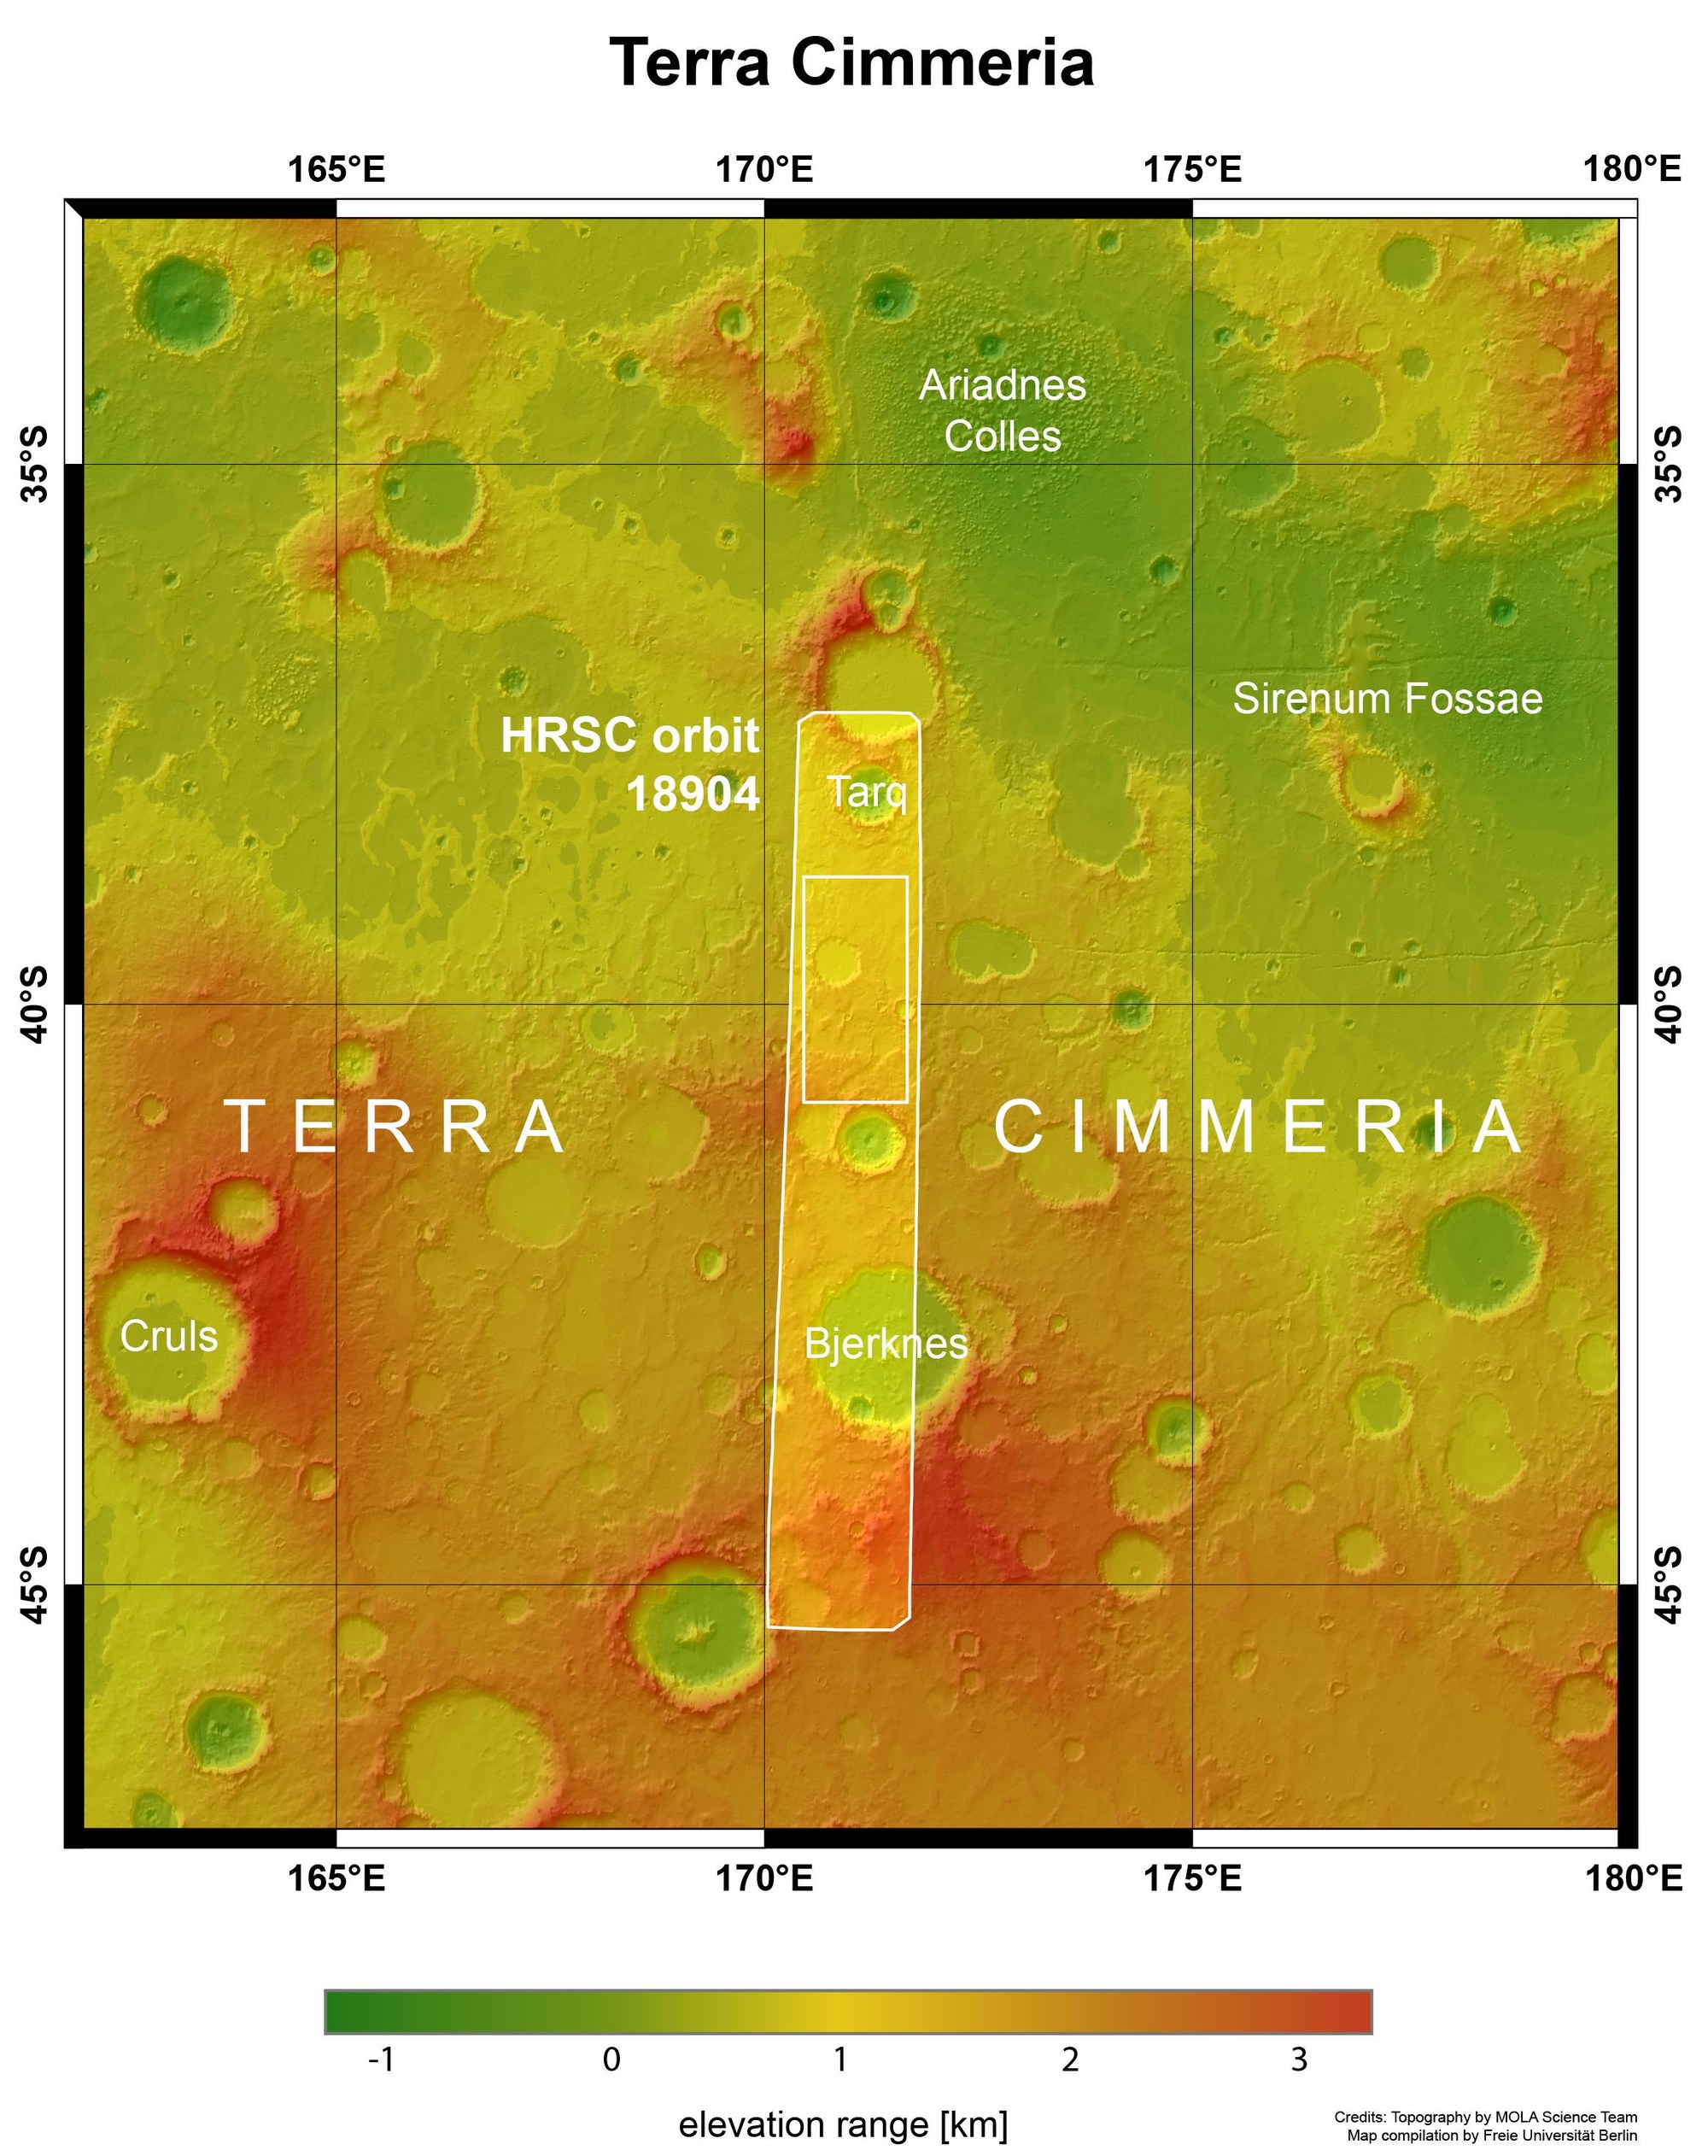 Topographic overview of the Terra Cimmeria highland region